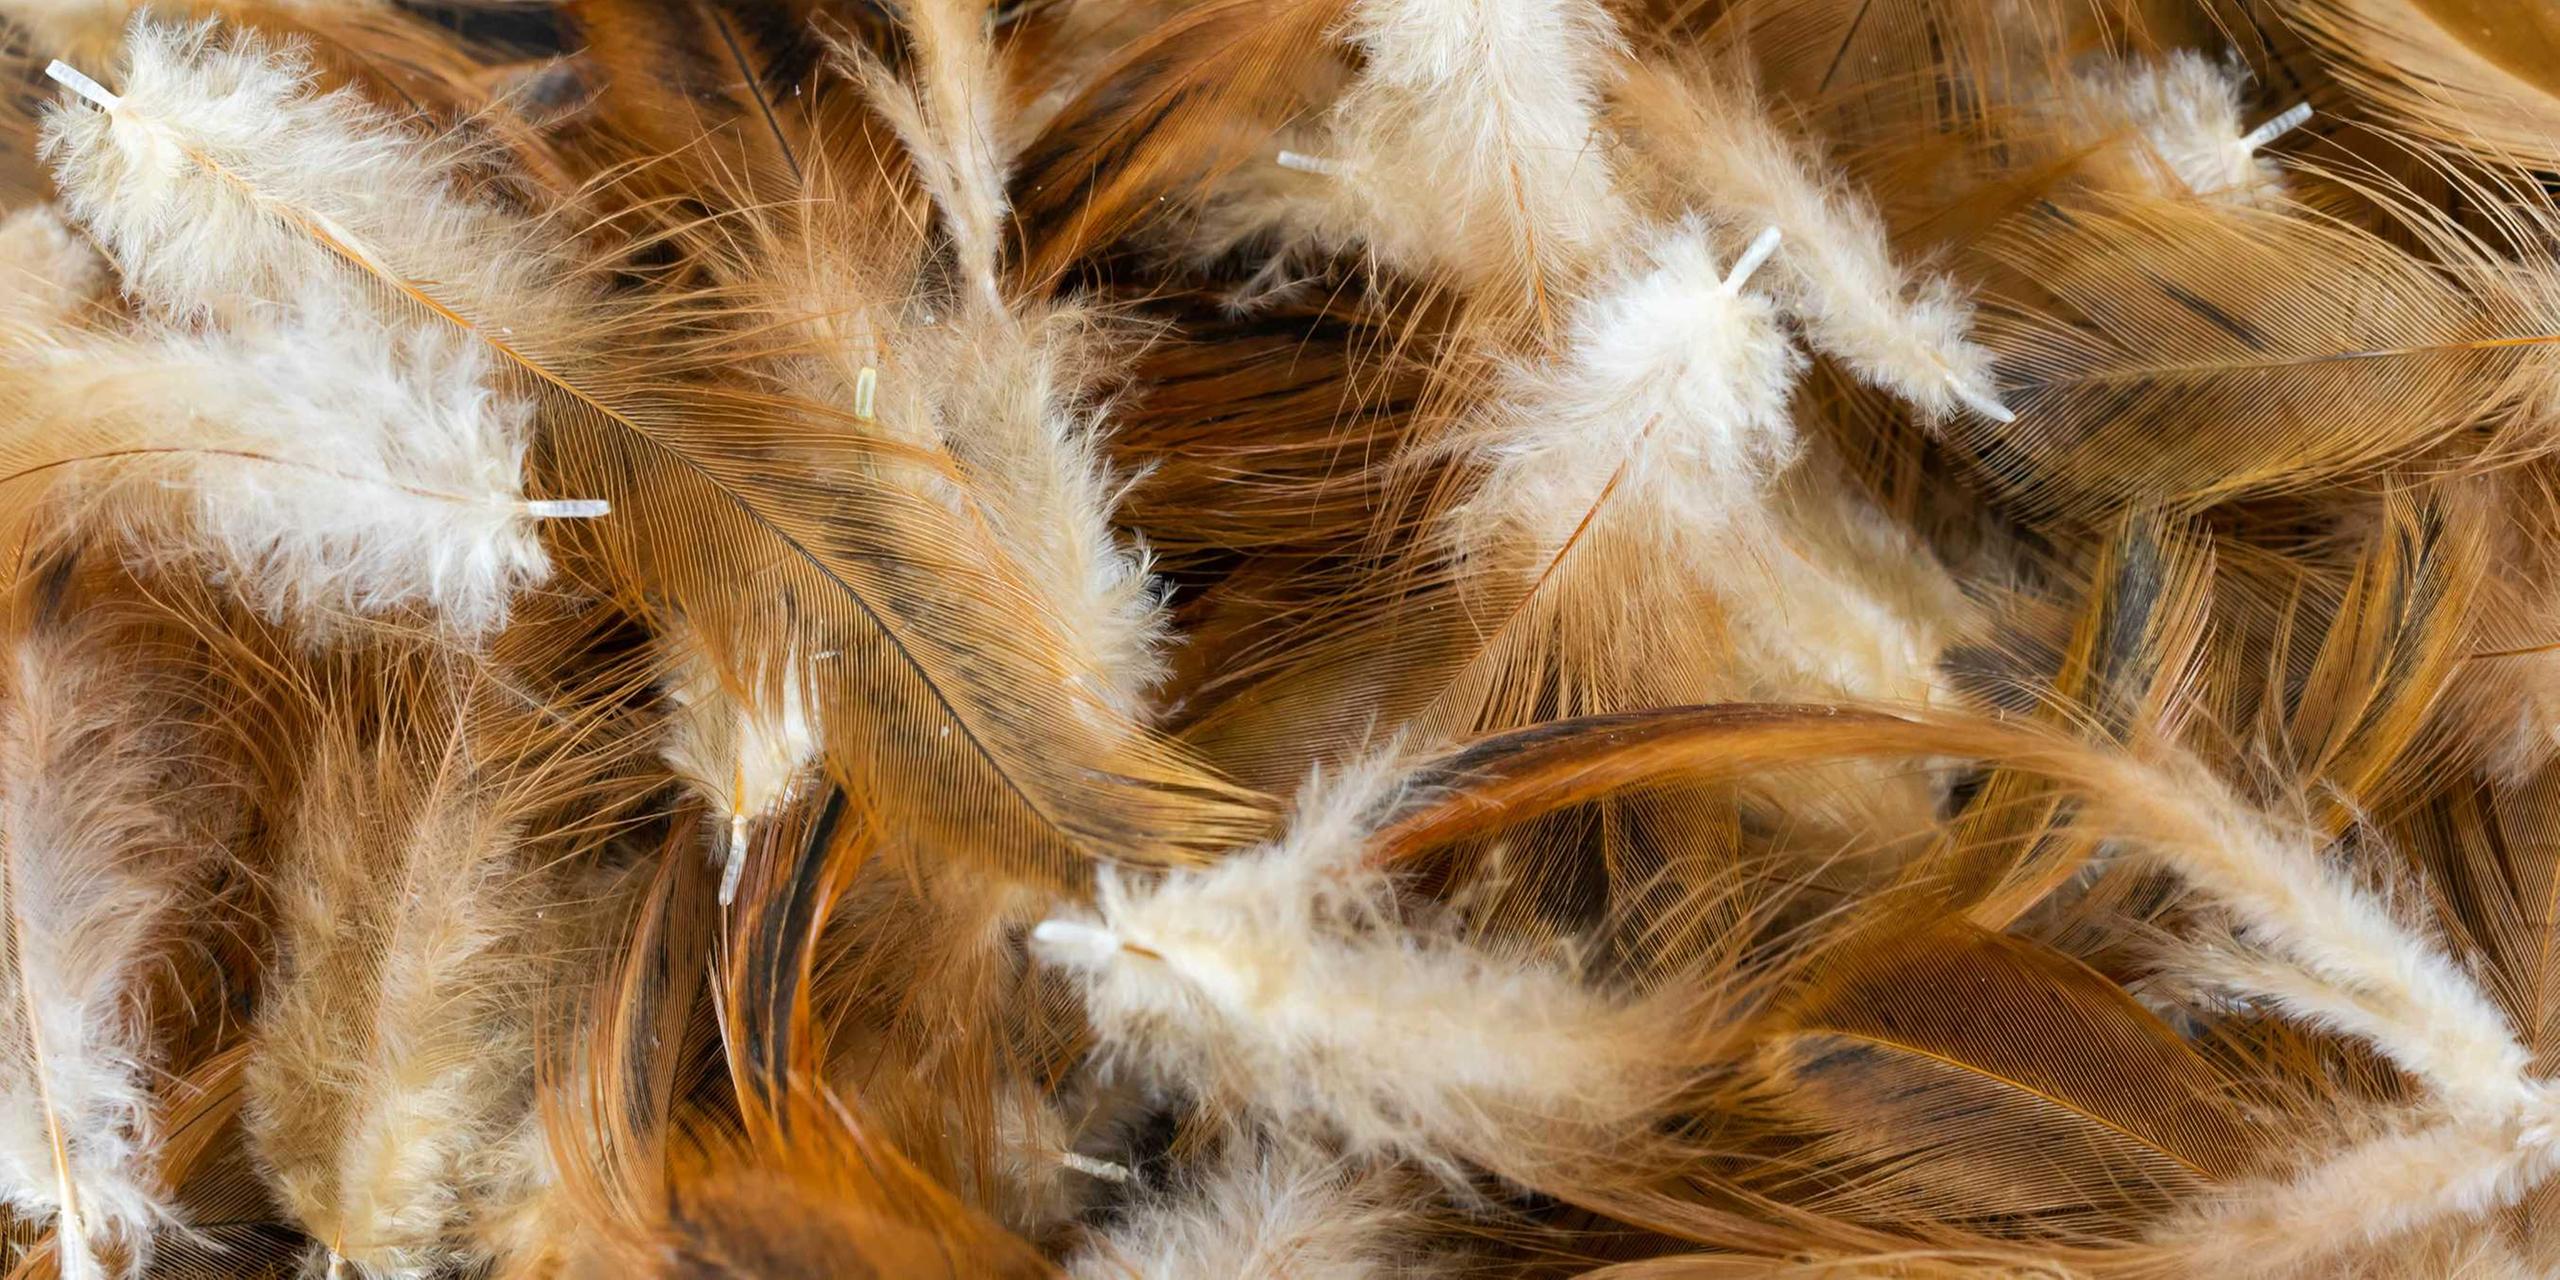 Image of chicken feathers.